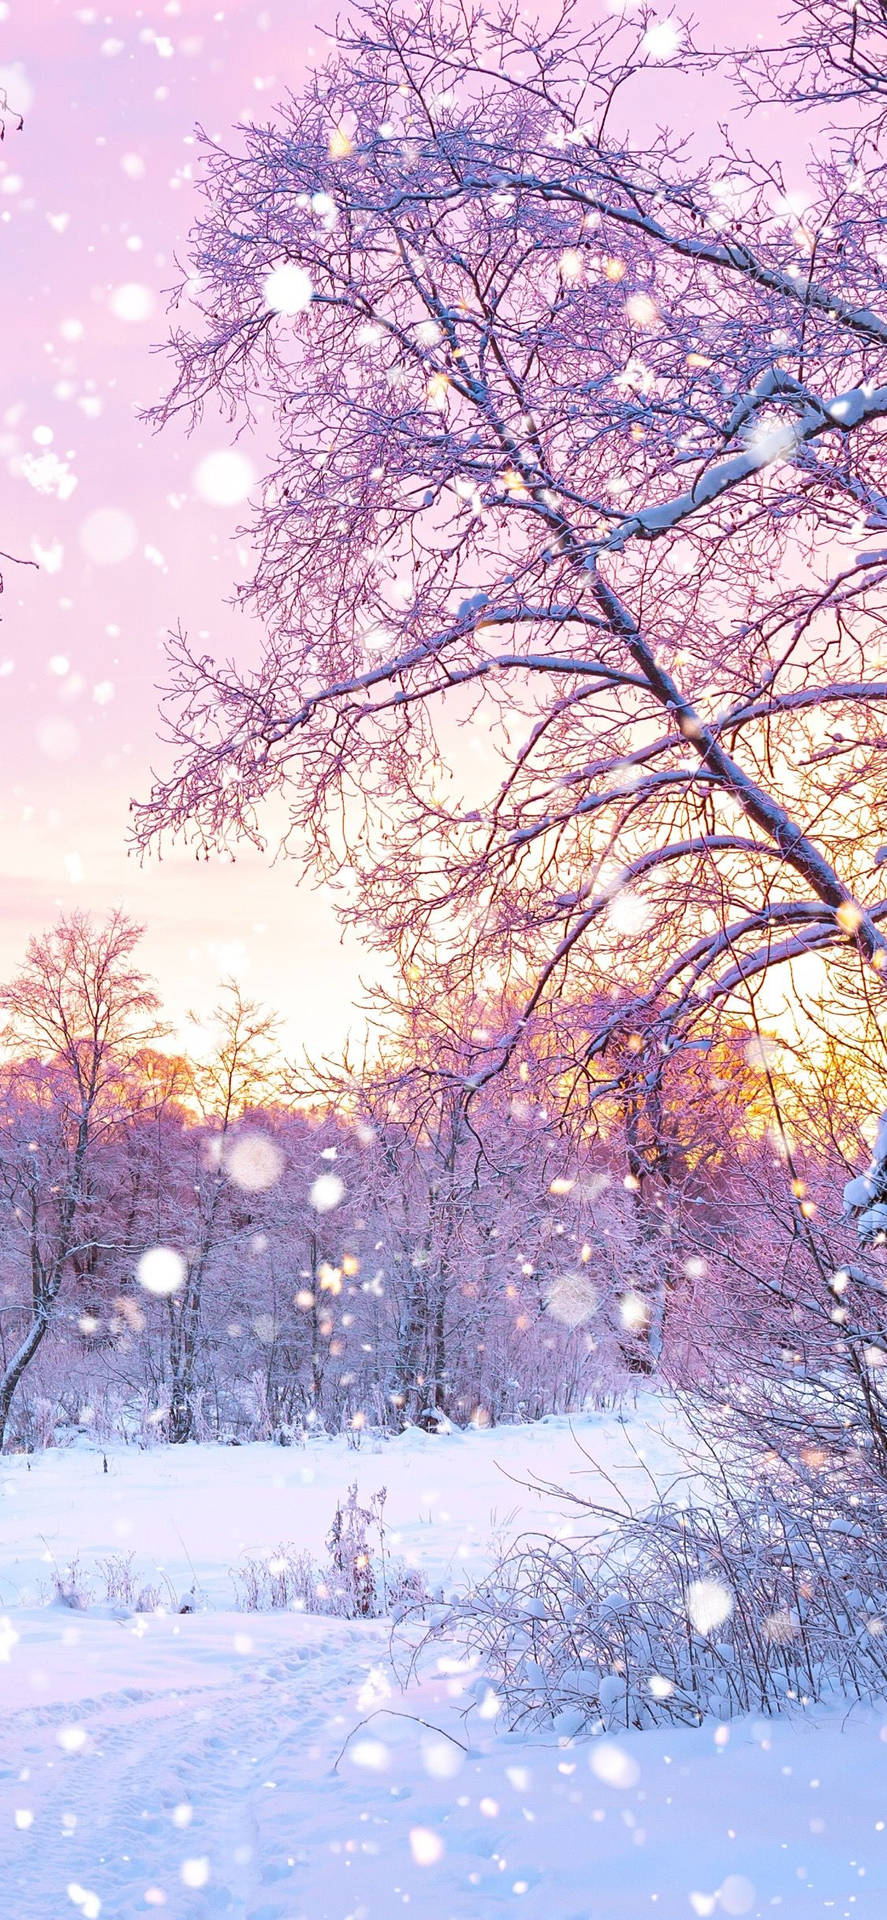 Cute Winter iPhone Tree With Snow Wallpaper